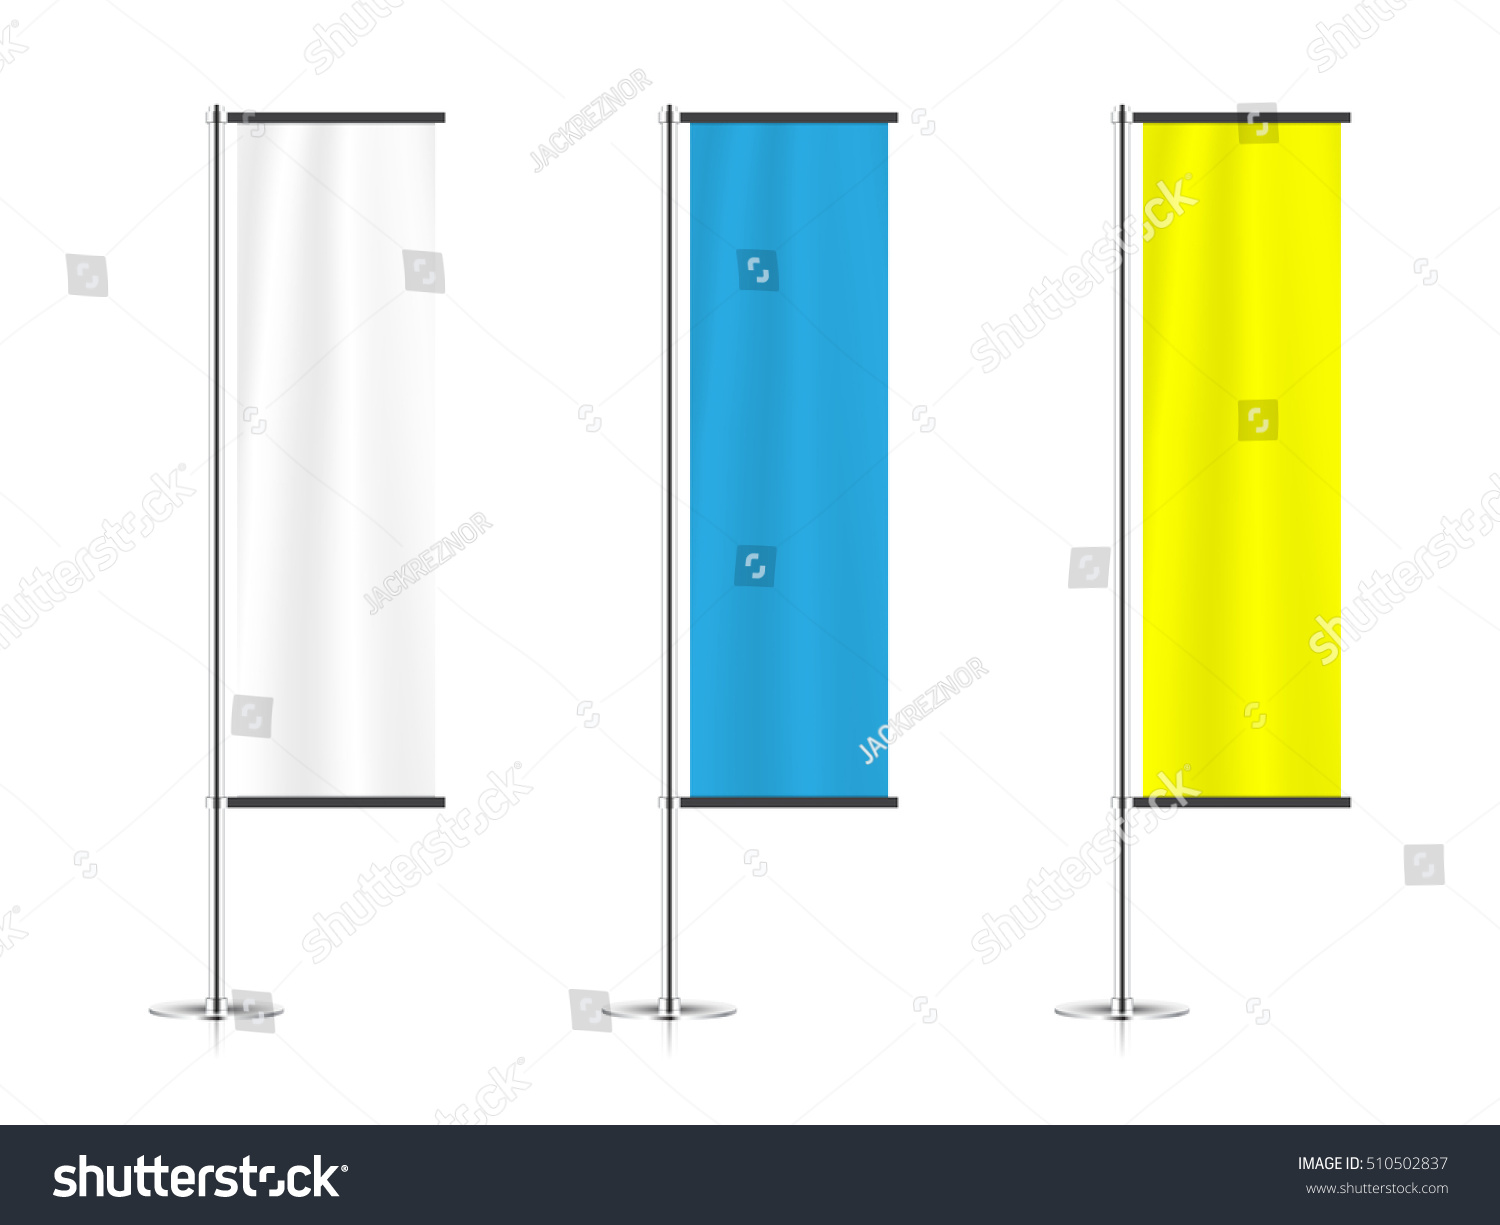 Download Set Of Banner Flags Templates Isolated On White Royalty Free Stock Vector 510502837 Avopix Com